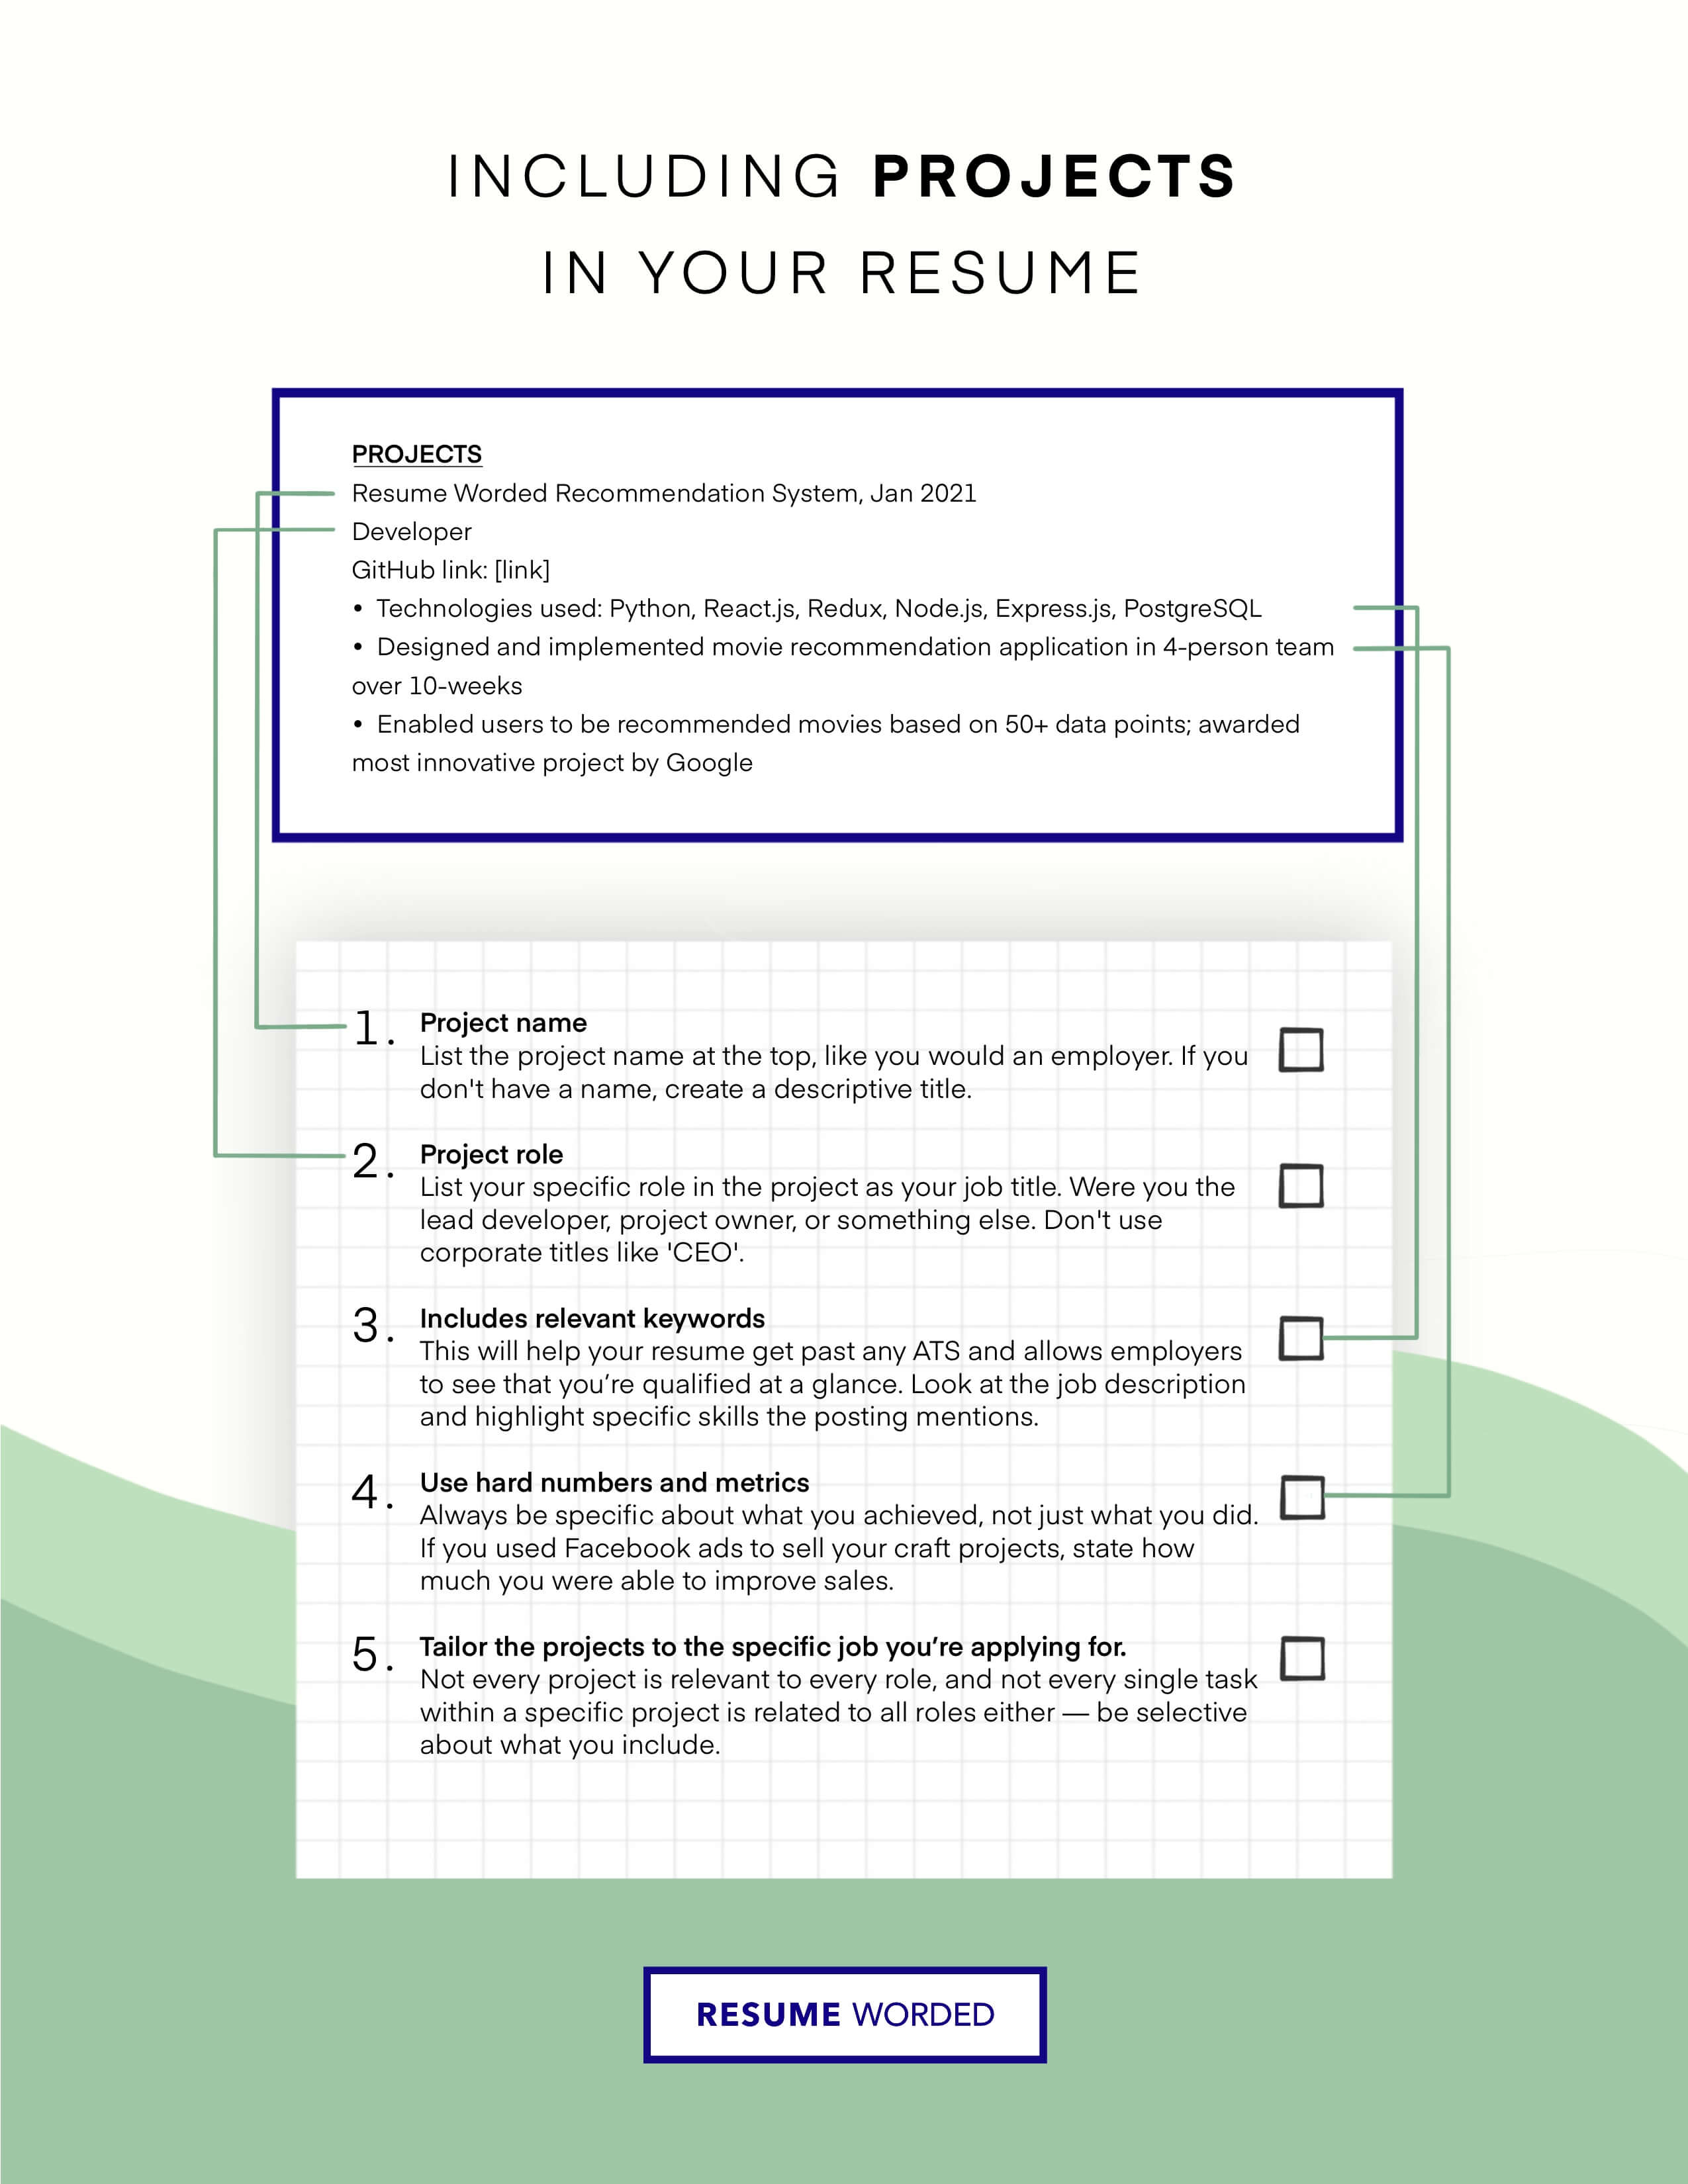 Detail your role in group projects - Entry Level Software Engineer CV